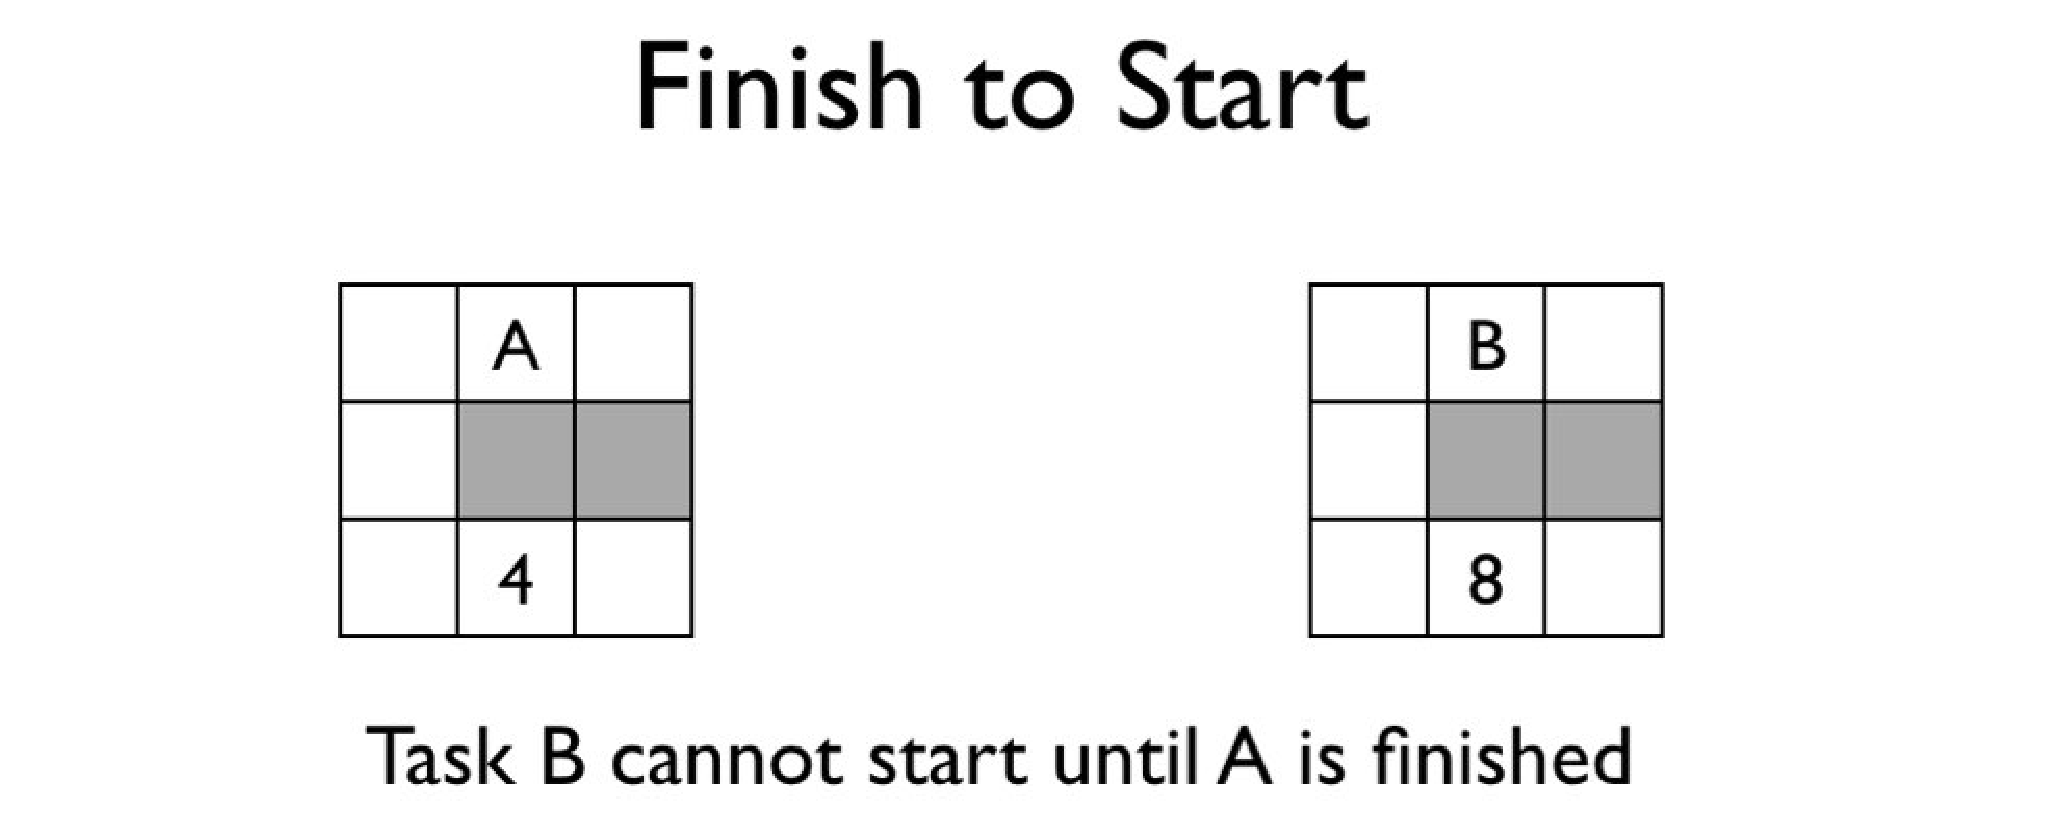 Diagram of a Finish to Start task relationship.